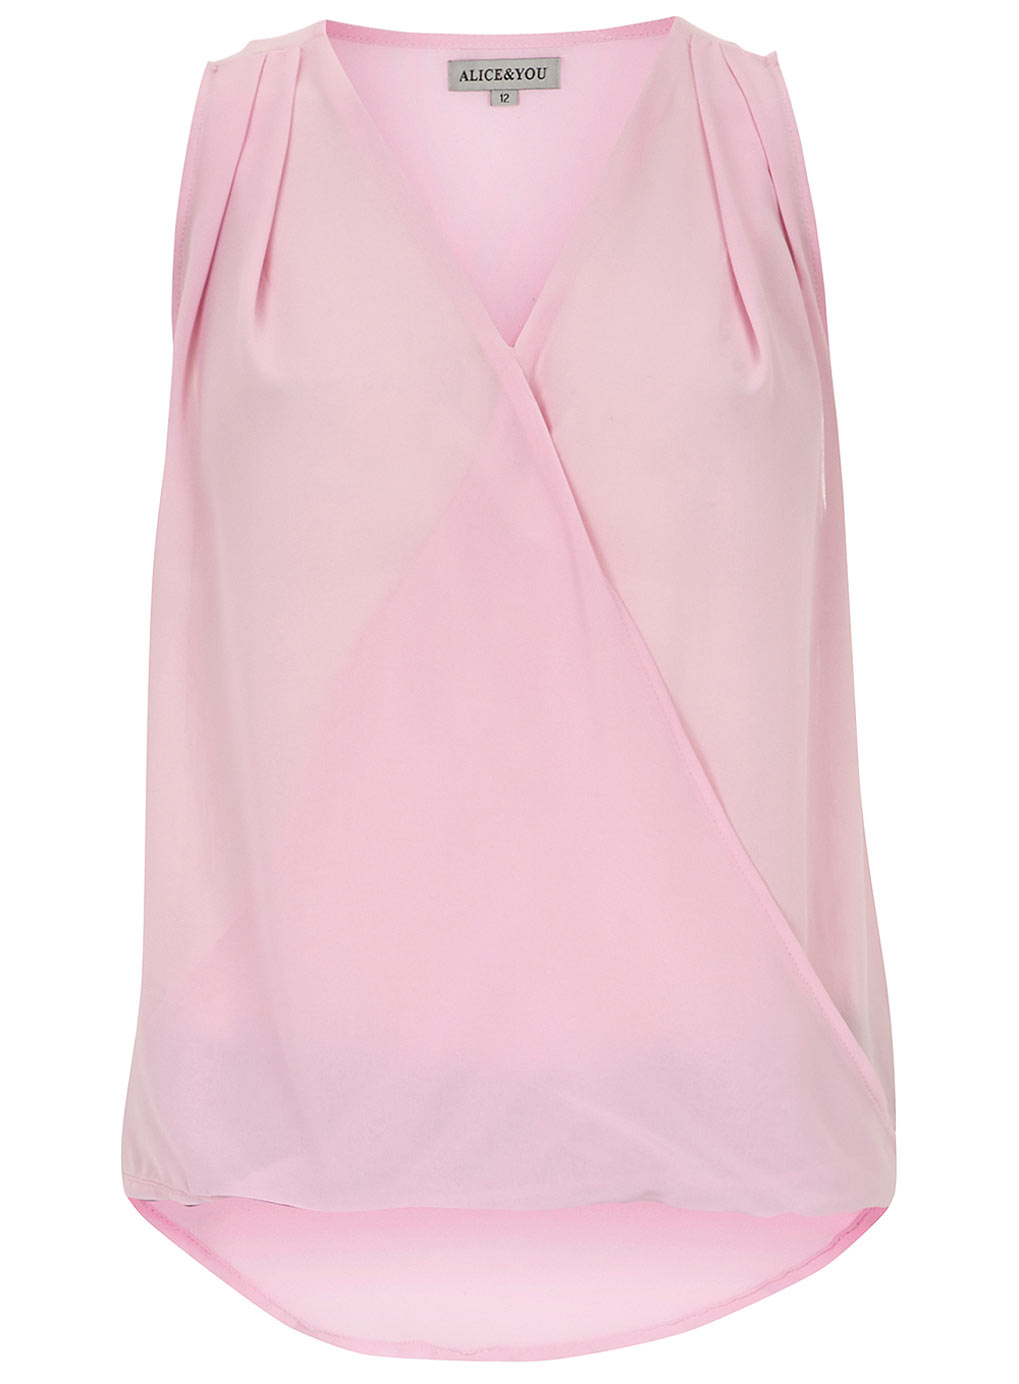 Dorothy Perkins Pink Sheer Crossover Blouse 75100714